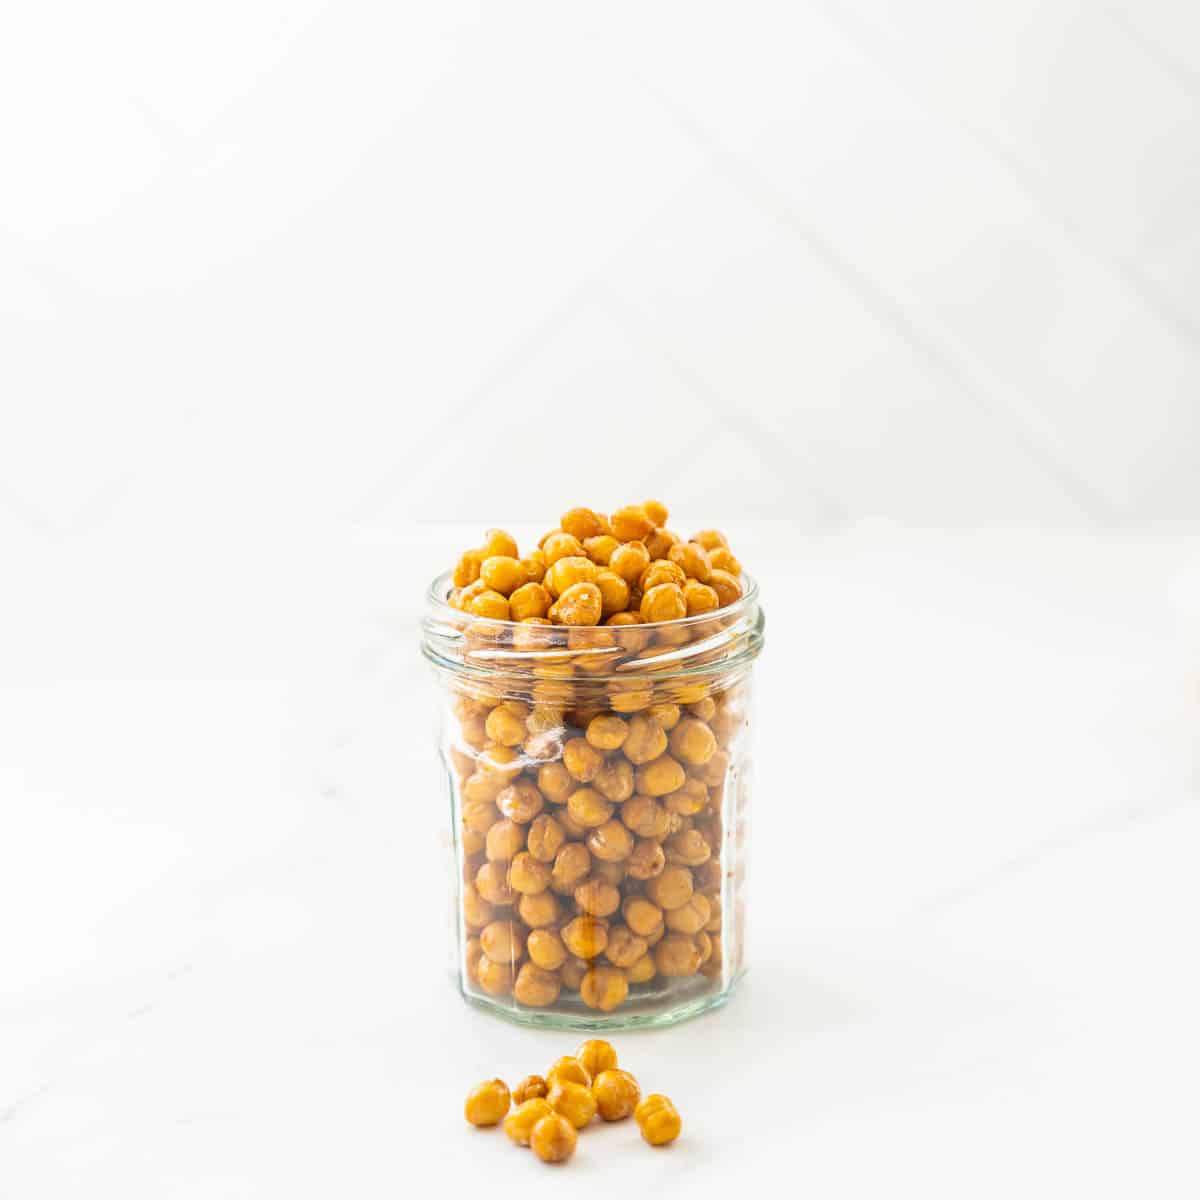 A glass jar overfull of roasted chickpeas